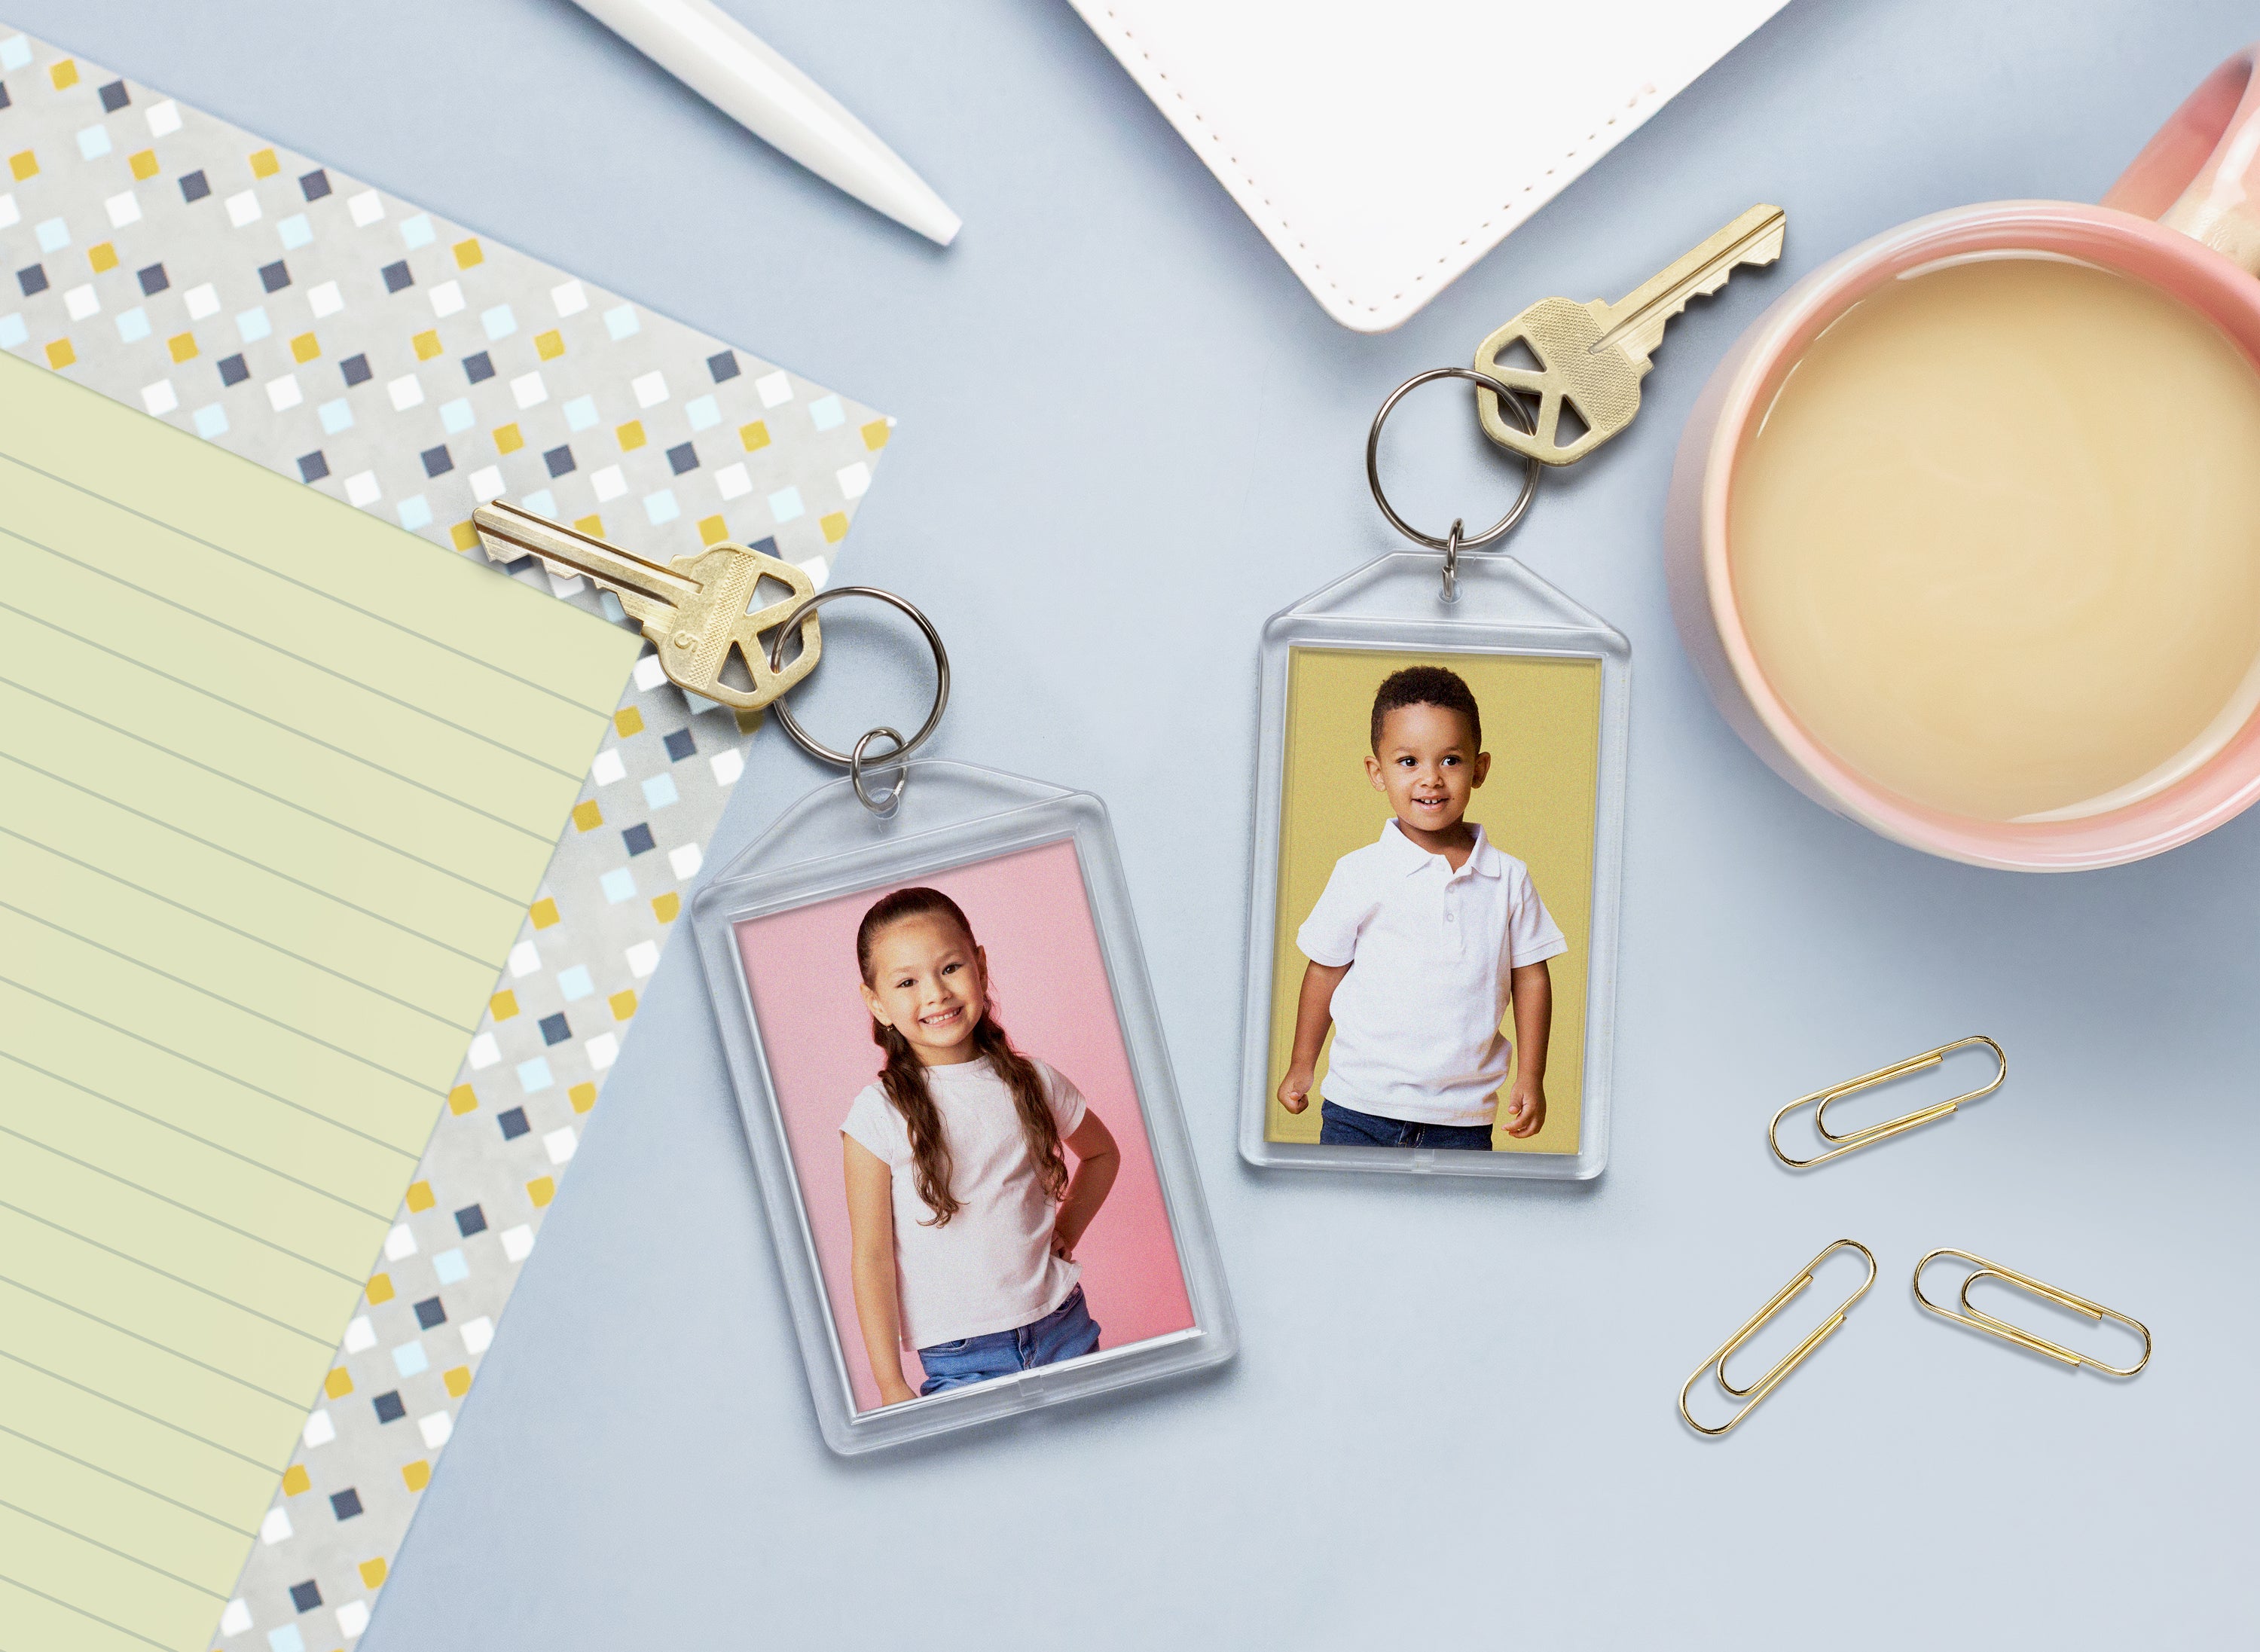 Promo Clear Snap-In Photo Keychain